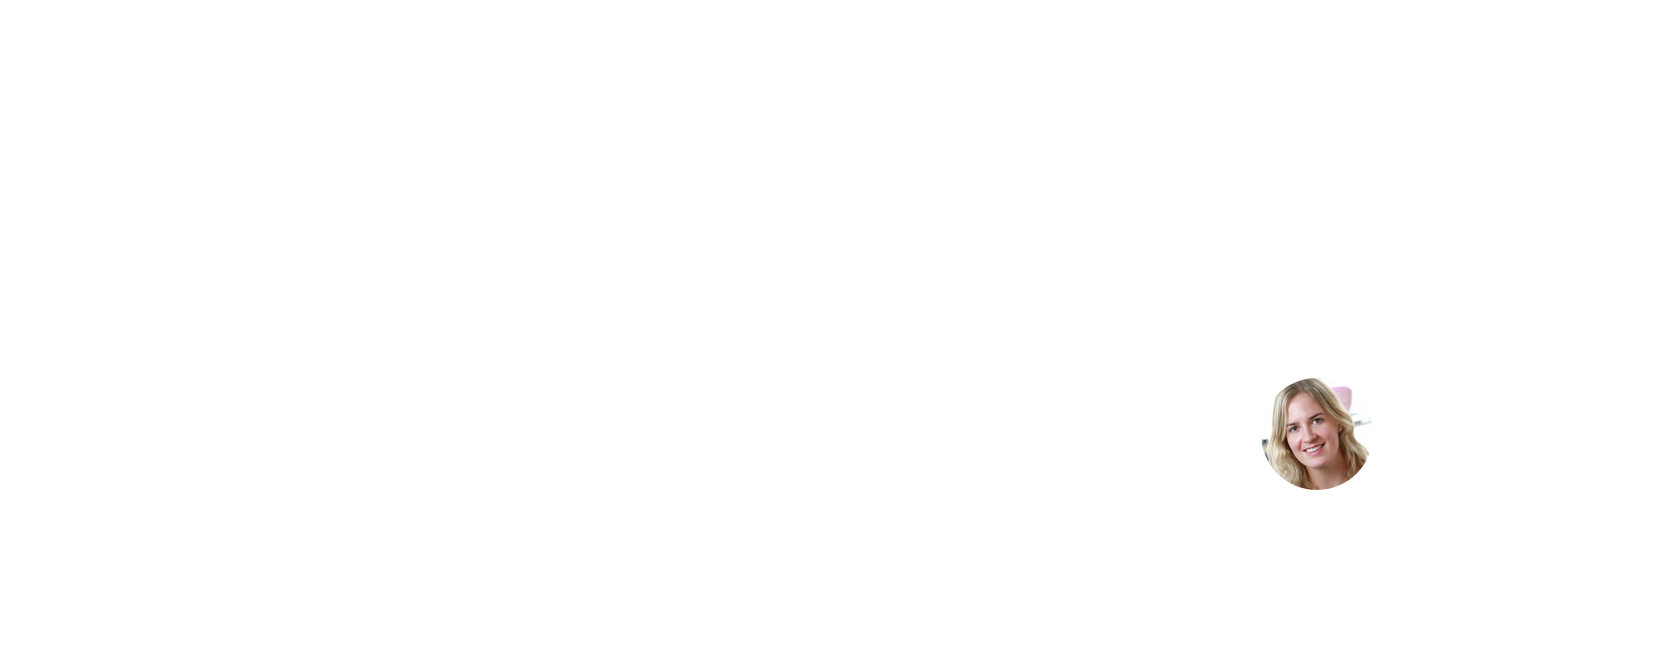 Testimonial The Self-Made Summit 2020 Business Carriere Event Ambitieuze Zakenvrouwen Freelancers Maus Smeets.png